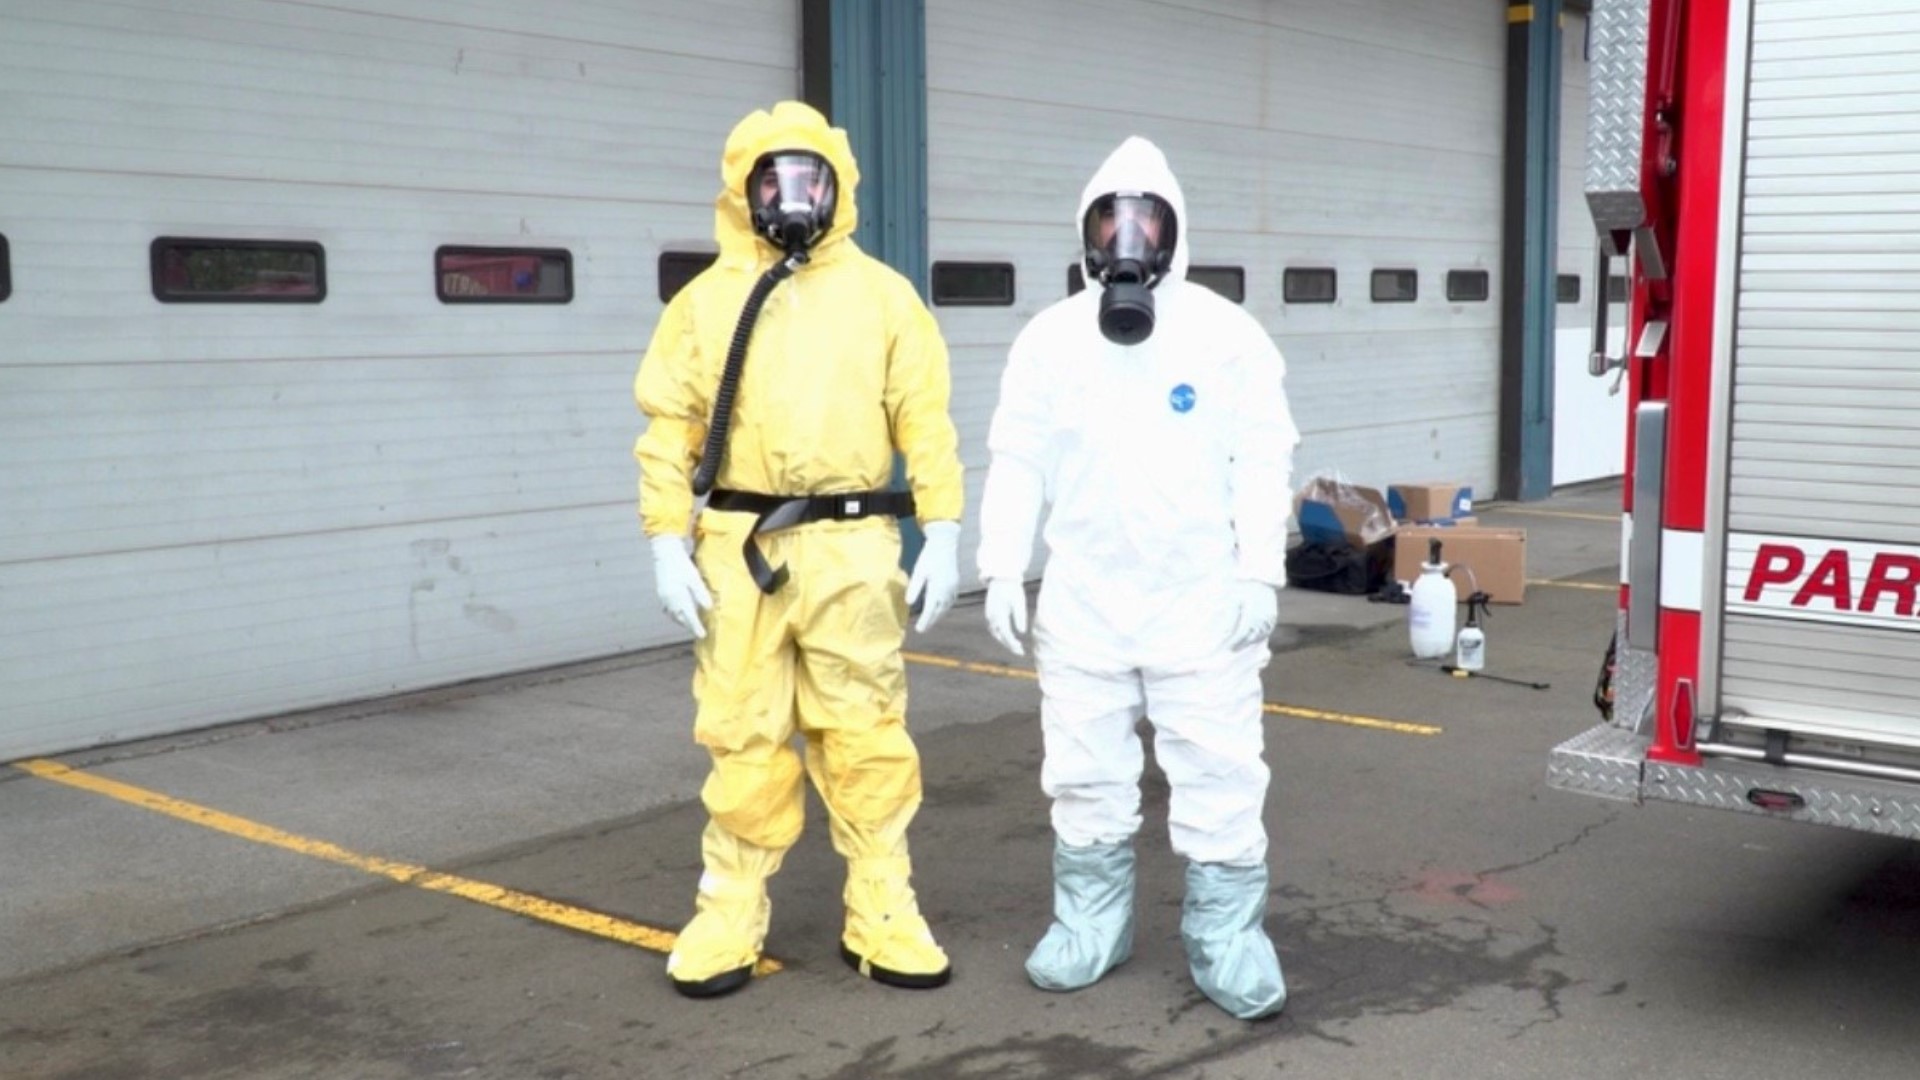 The nationwide shortage of disposable personal protective equipment coupled with the need to protect crews led Portland Fire & Rescue to resort to reusable gear.